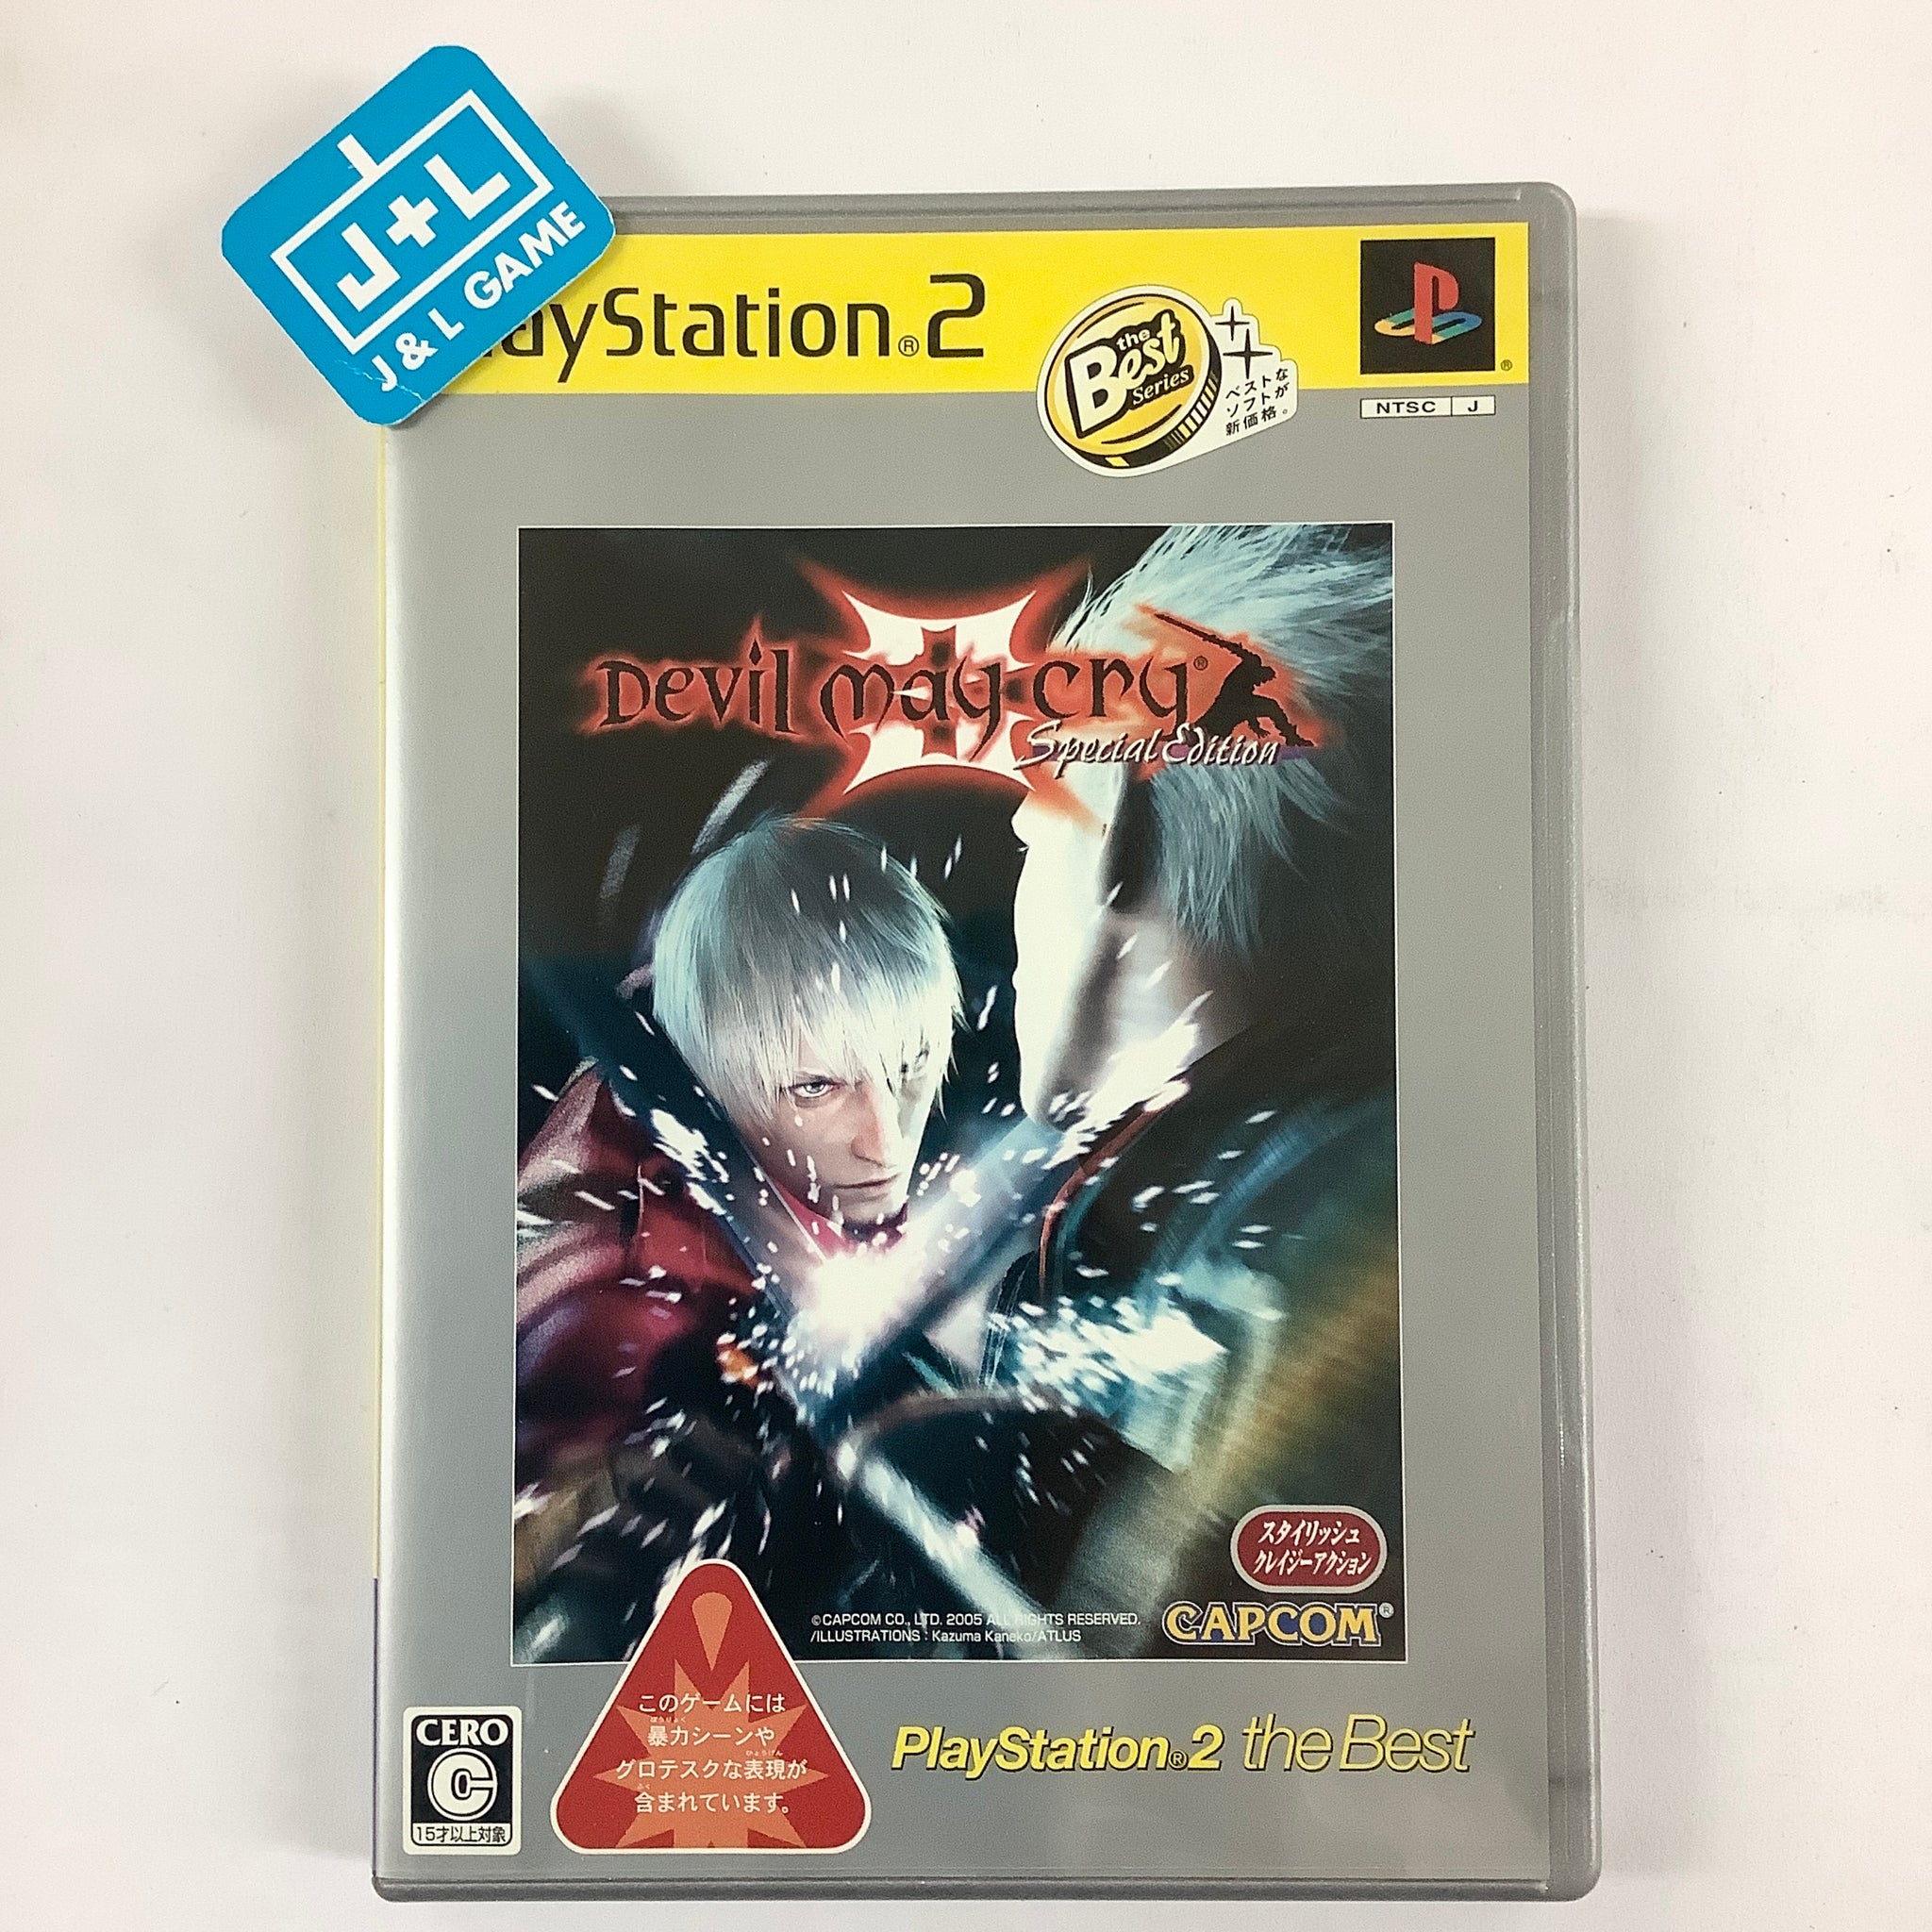 Devil May Cry 3 Special Edition (PlayStation2 the Best) for